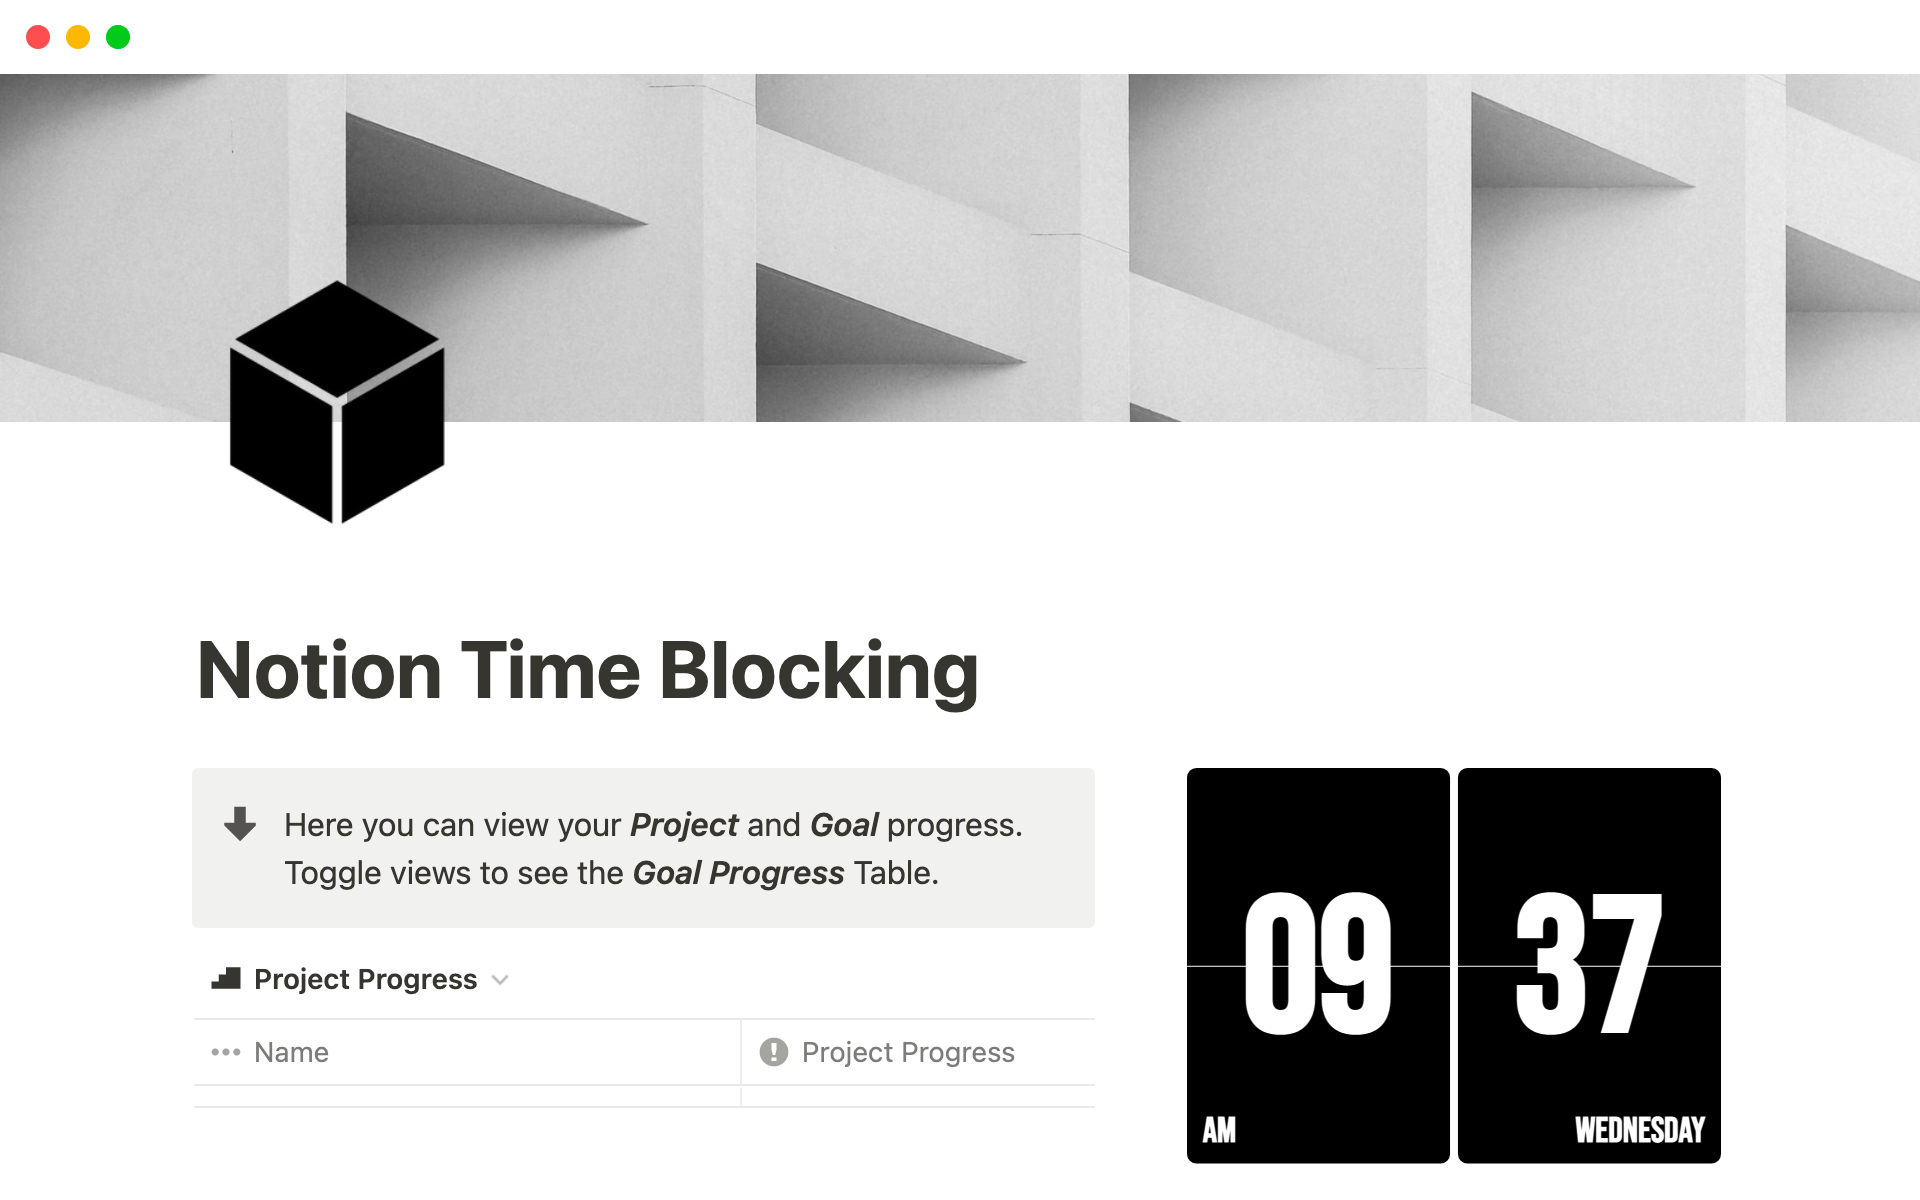 Combines the power of time blocking and SMART Goals to help users save, on average, 30 days a year through organizing projects, tasks, goals and objectives.